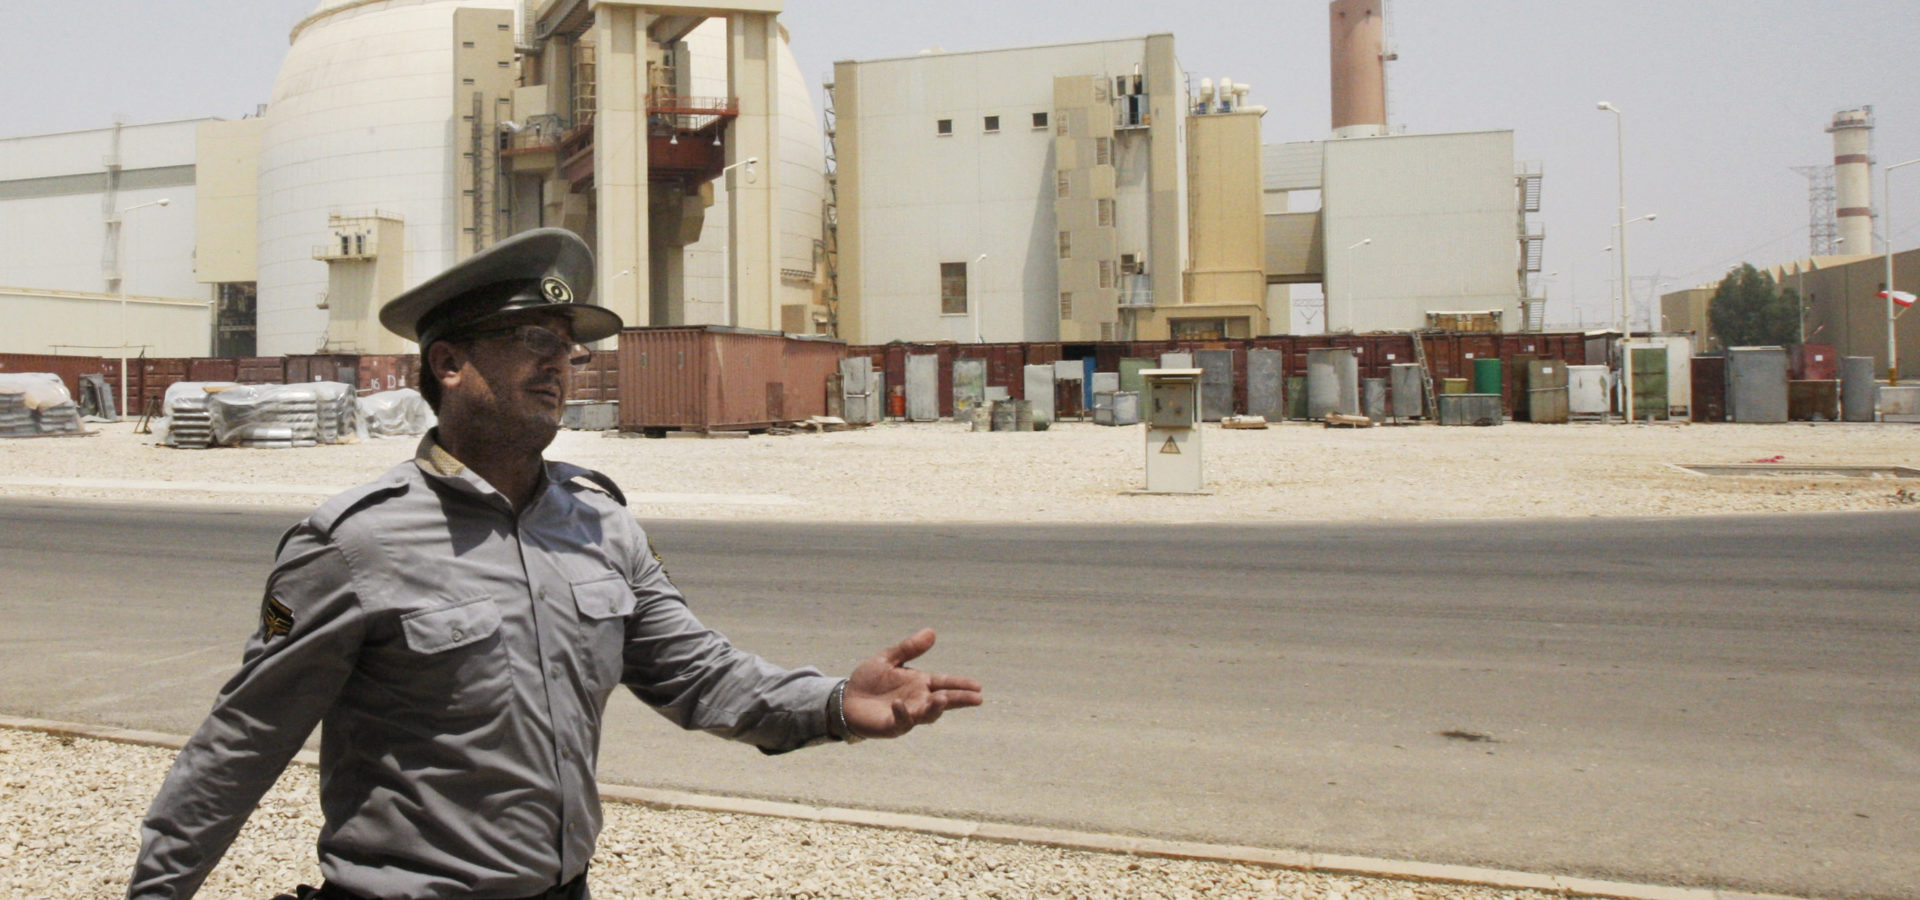 An Iranian security officer directs media at the Bushehr nuclear power plant, with the reactor building seen in the background, just outside the southern city of Bushehr, Iran. (AP Photo/Vahid Salemi)